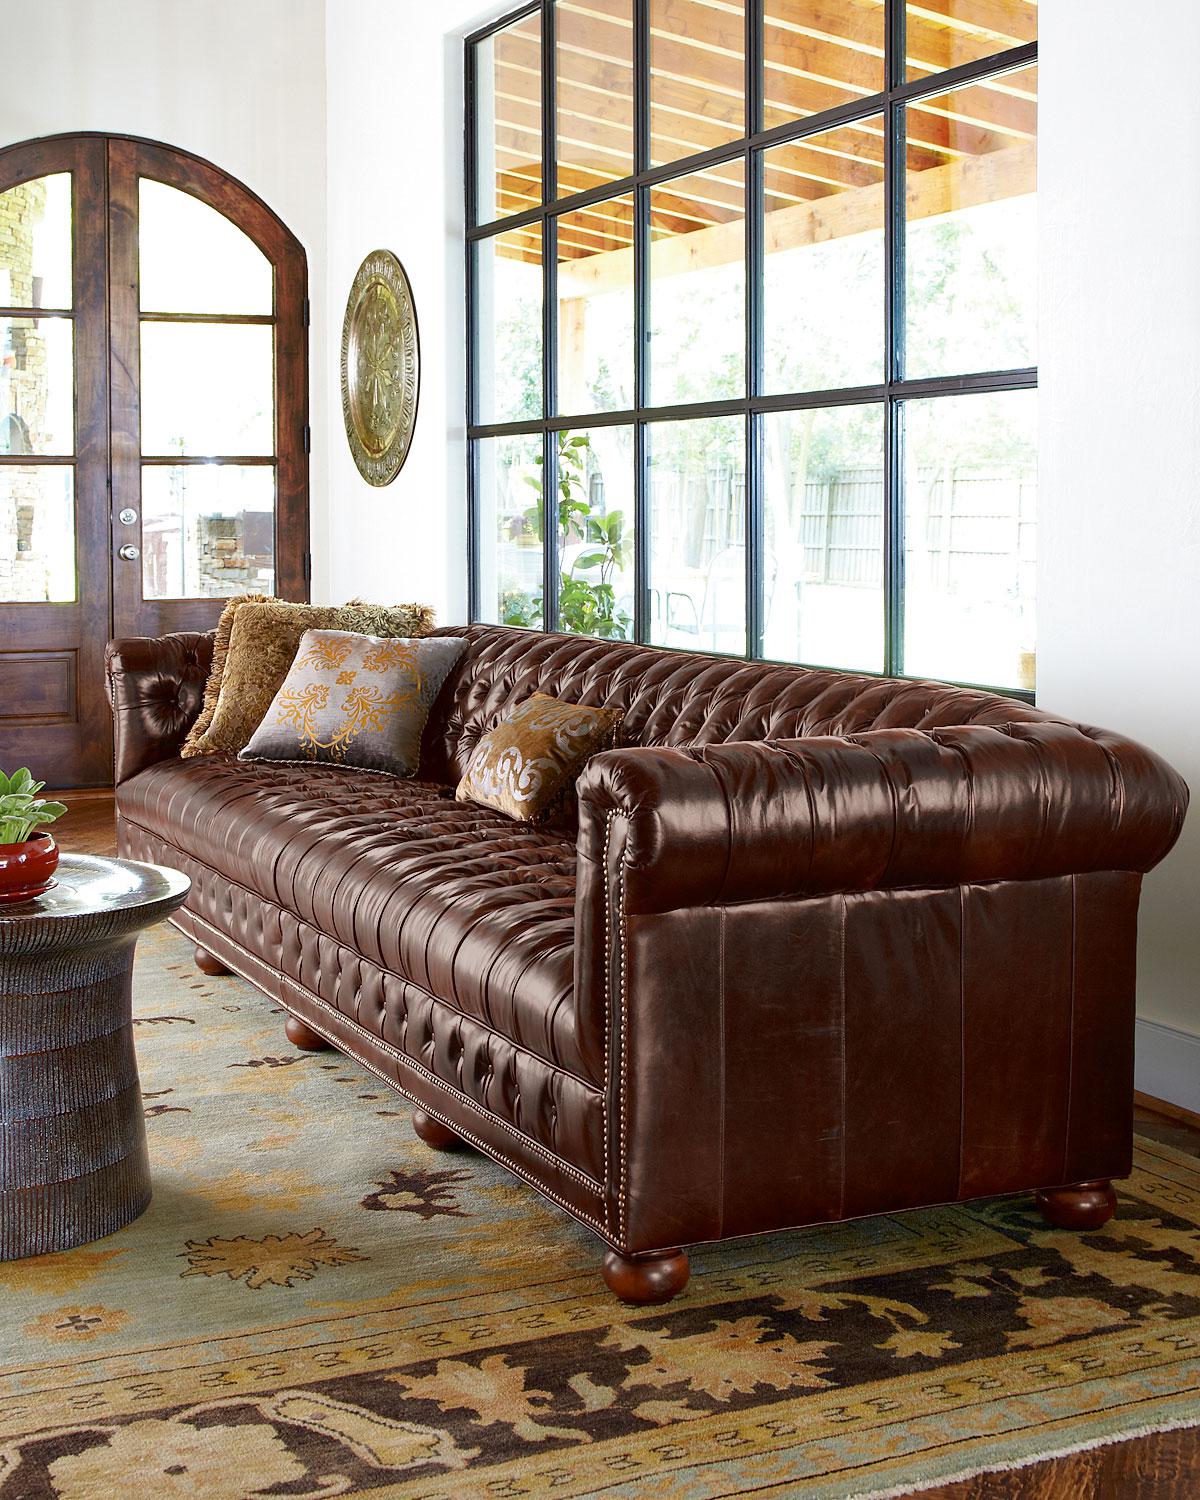 Industrial Style Furniture Get A, Extra Long Tufted Leather Sofa